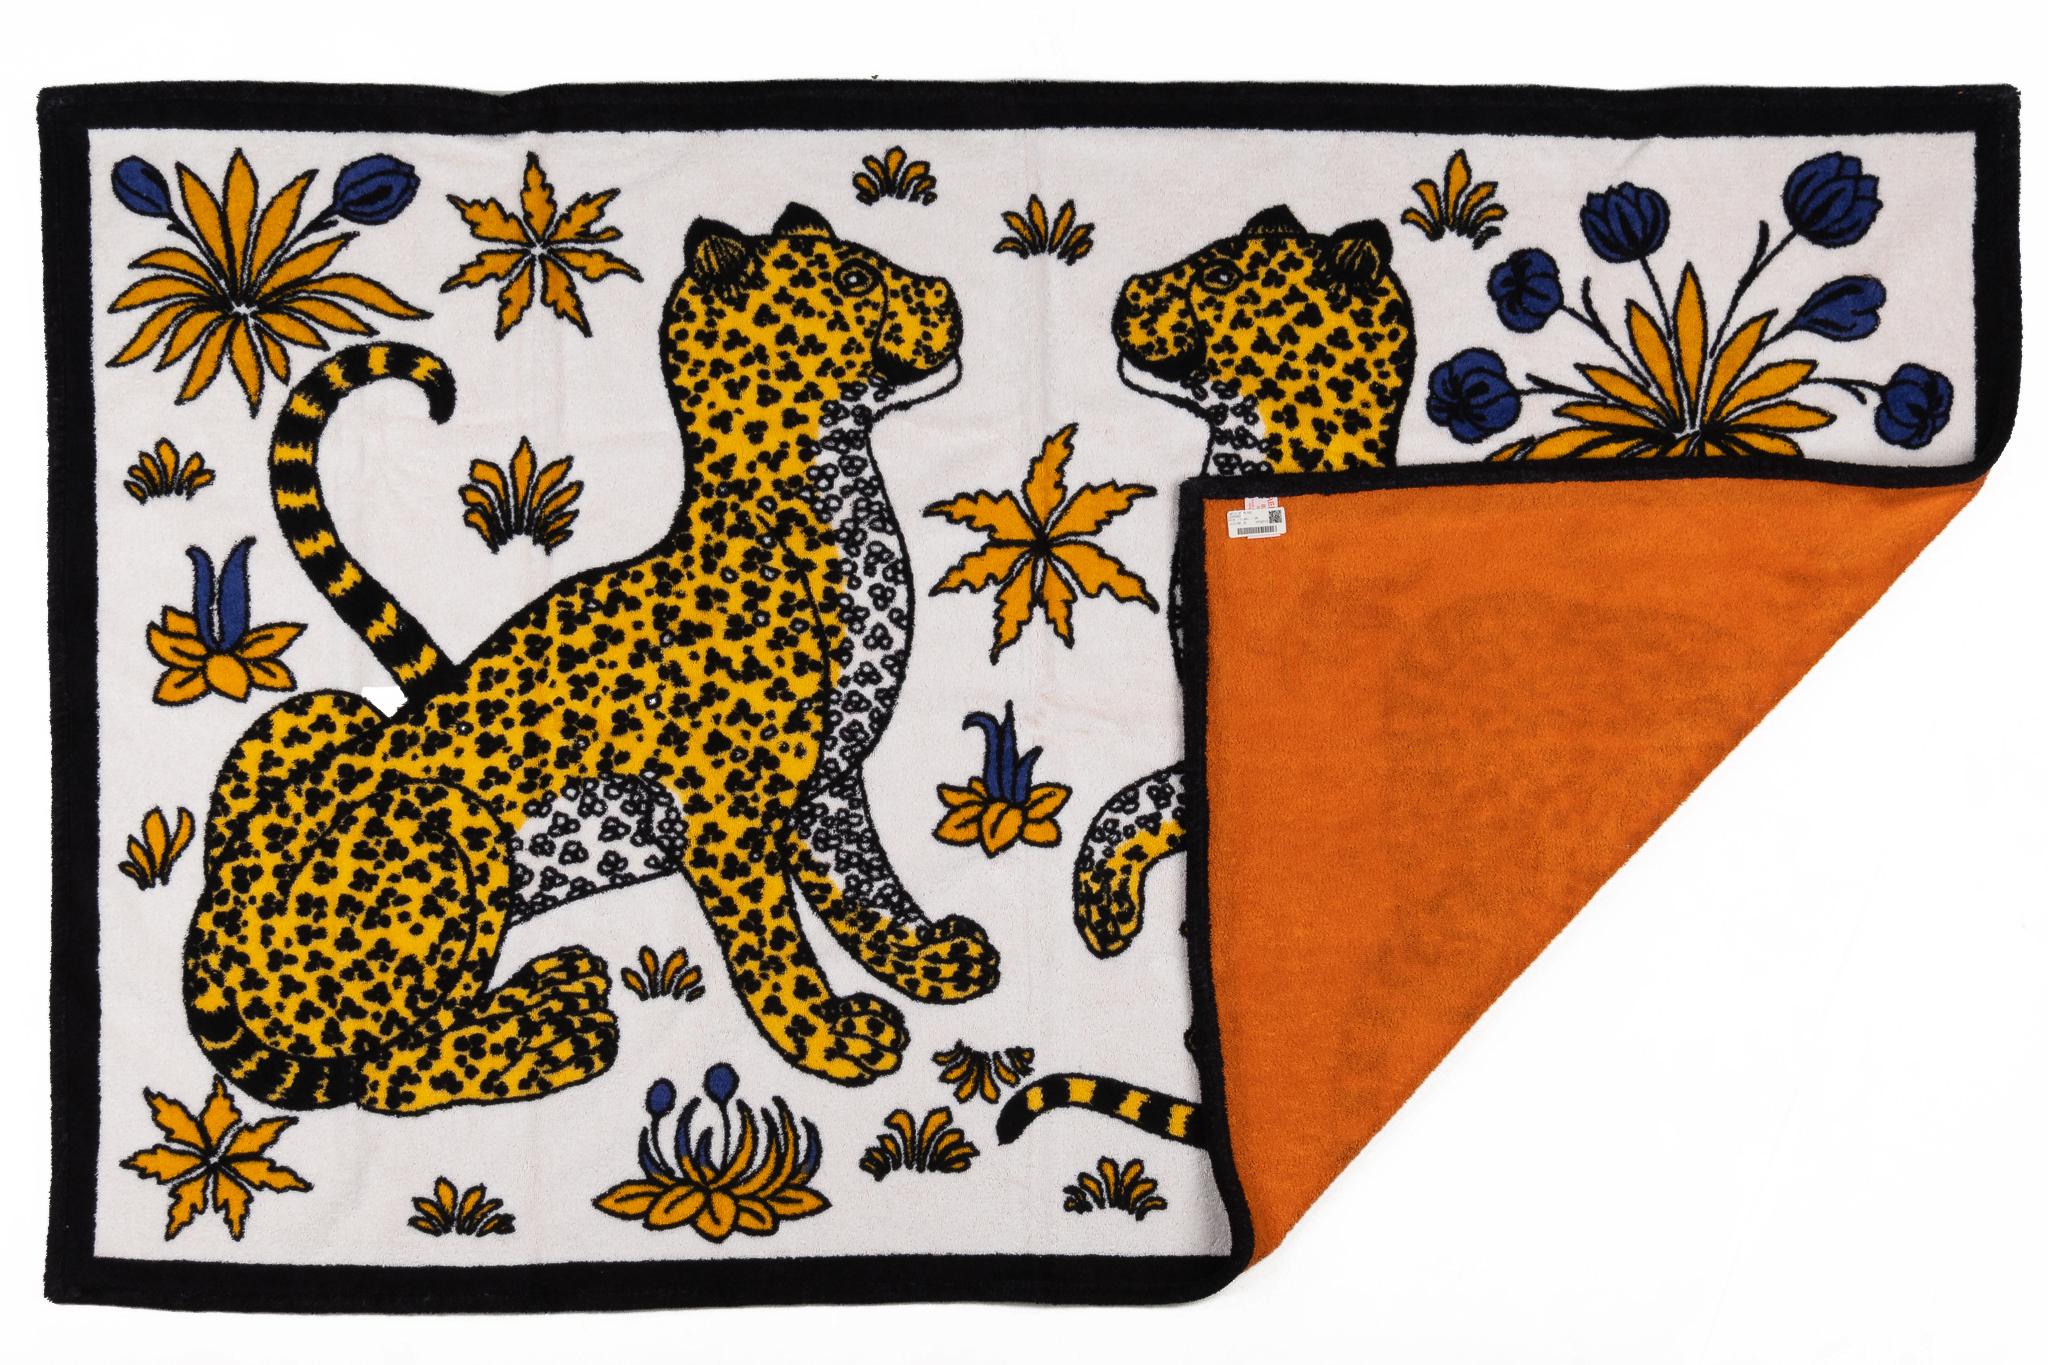 Hermès New Guepards Beach Towel In New Condition For Sale In West Hollywood, CA